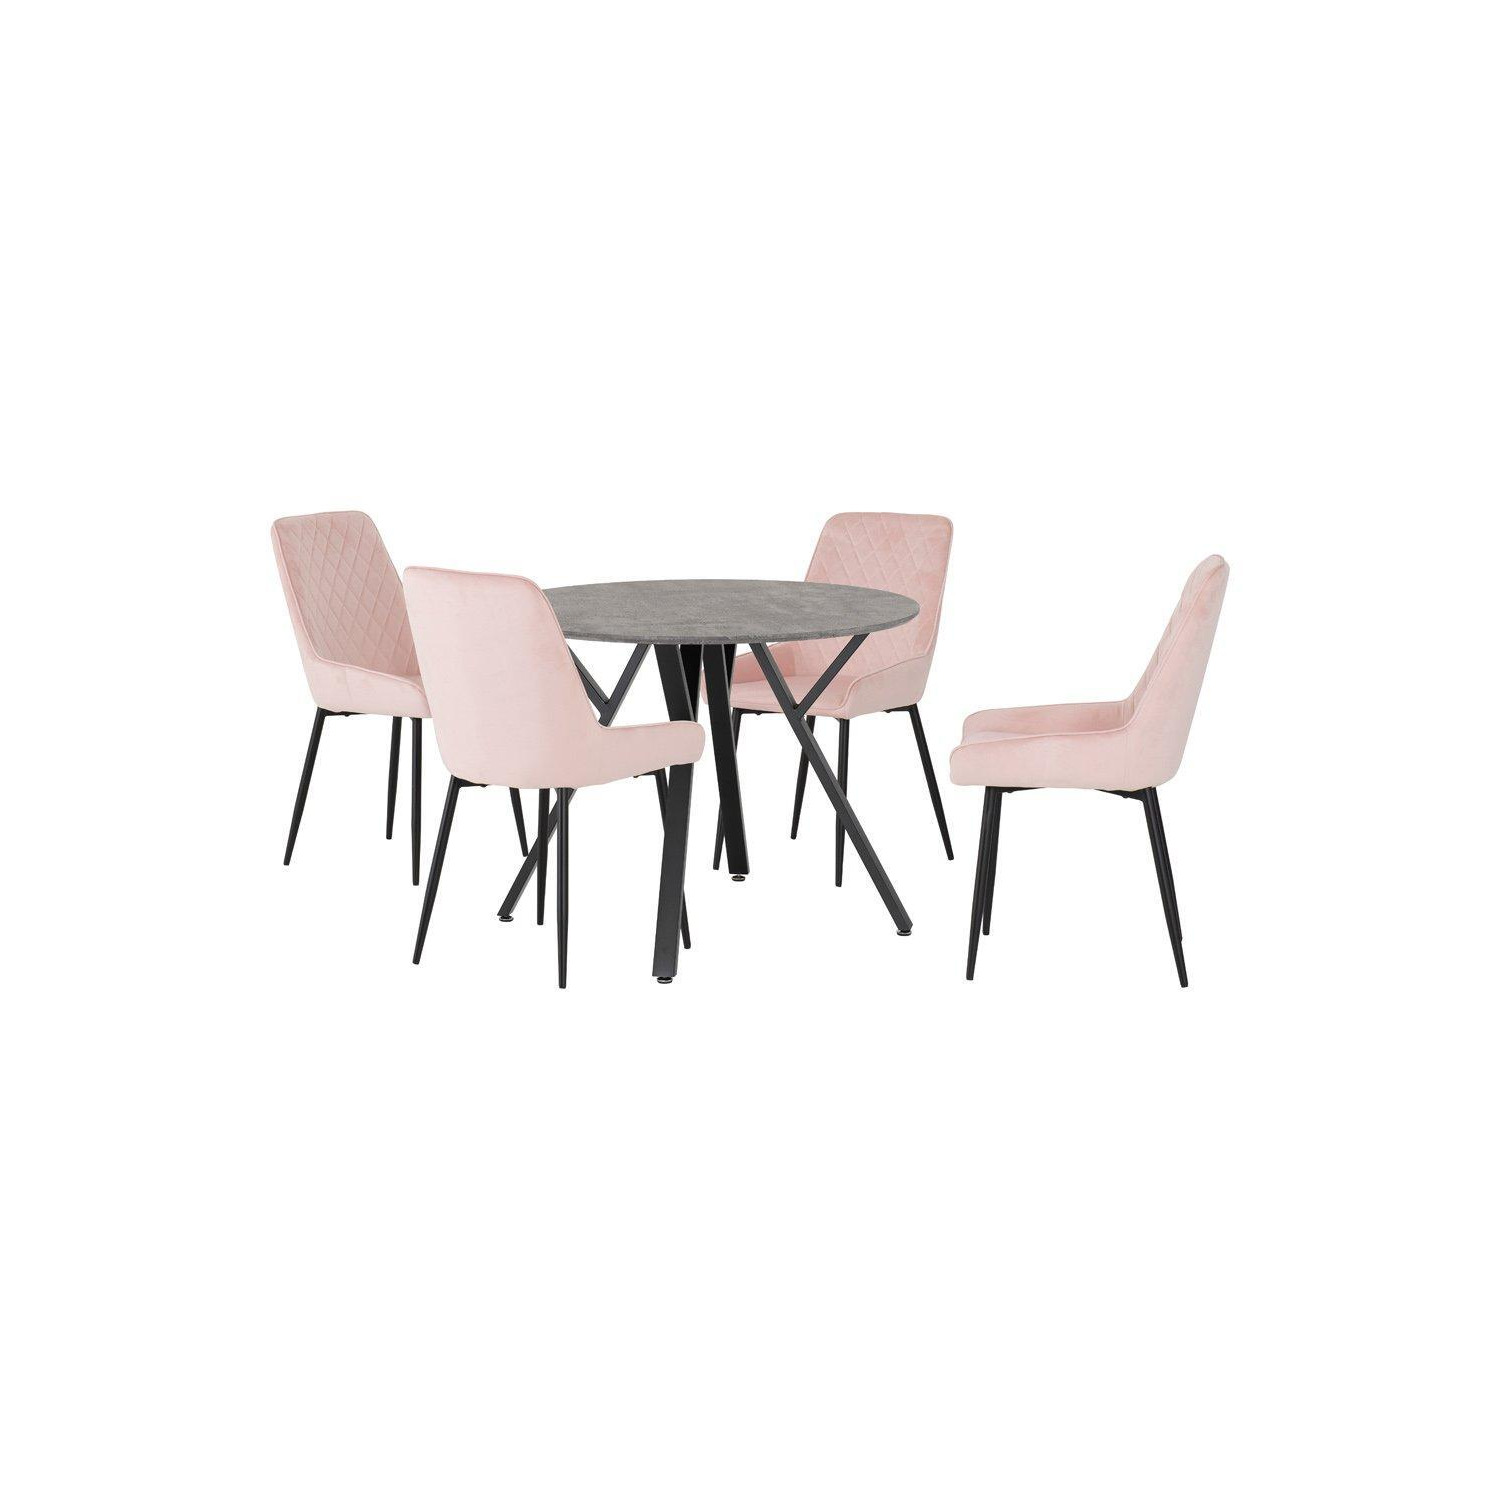 Athens Round Dining Set with Avery Chairs - image 1